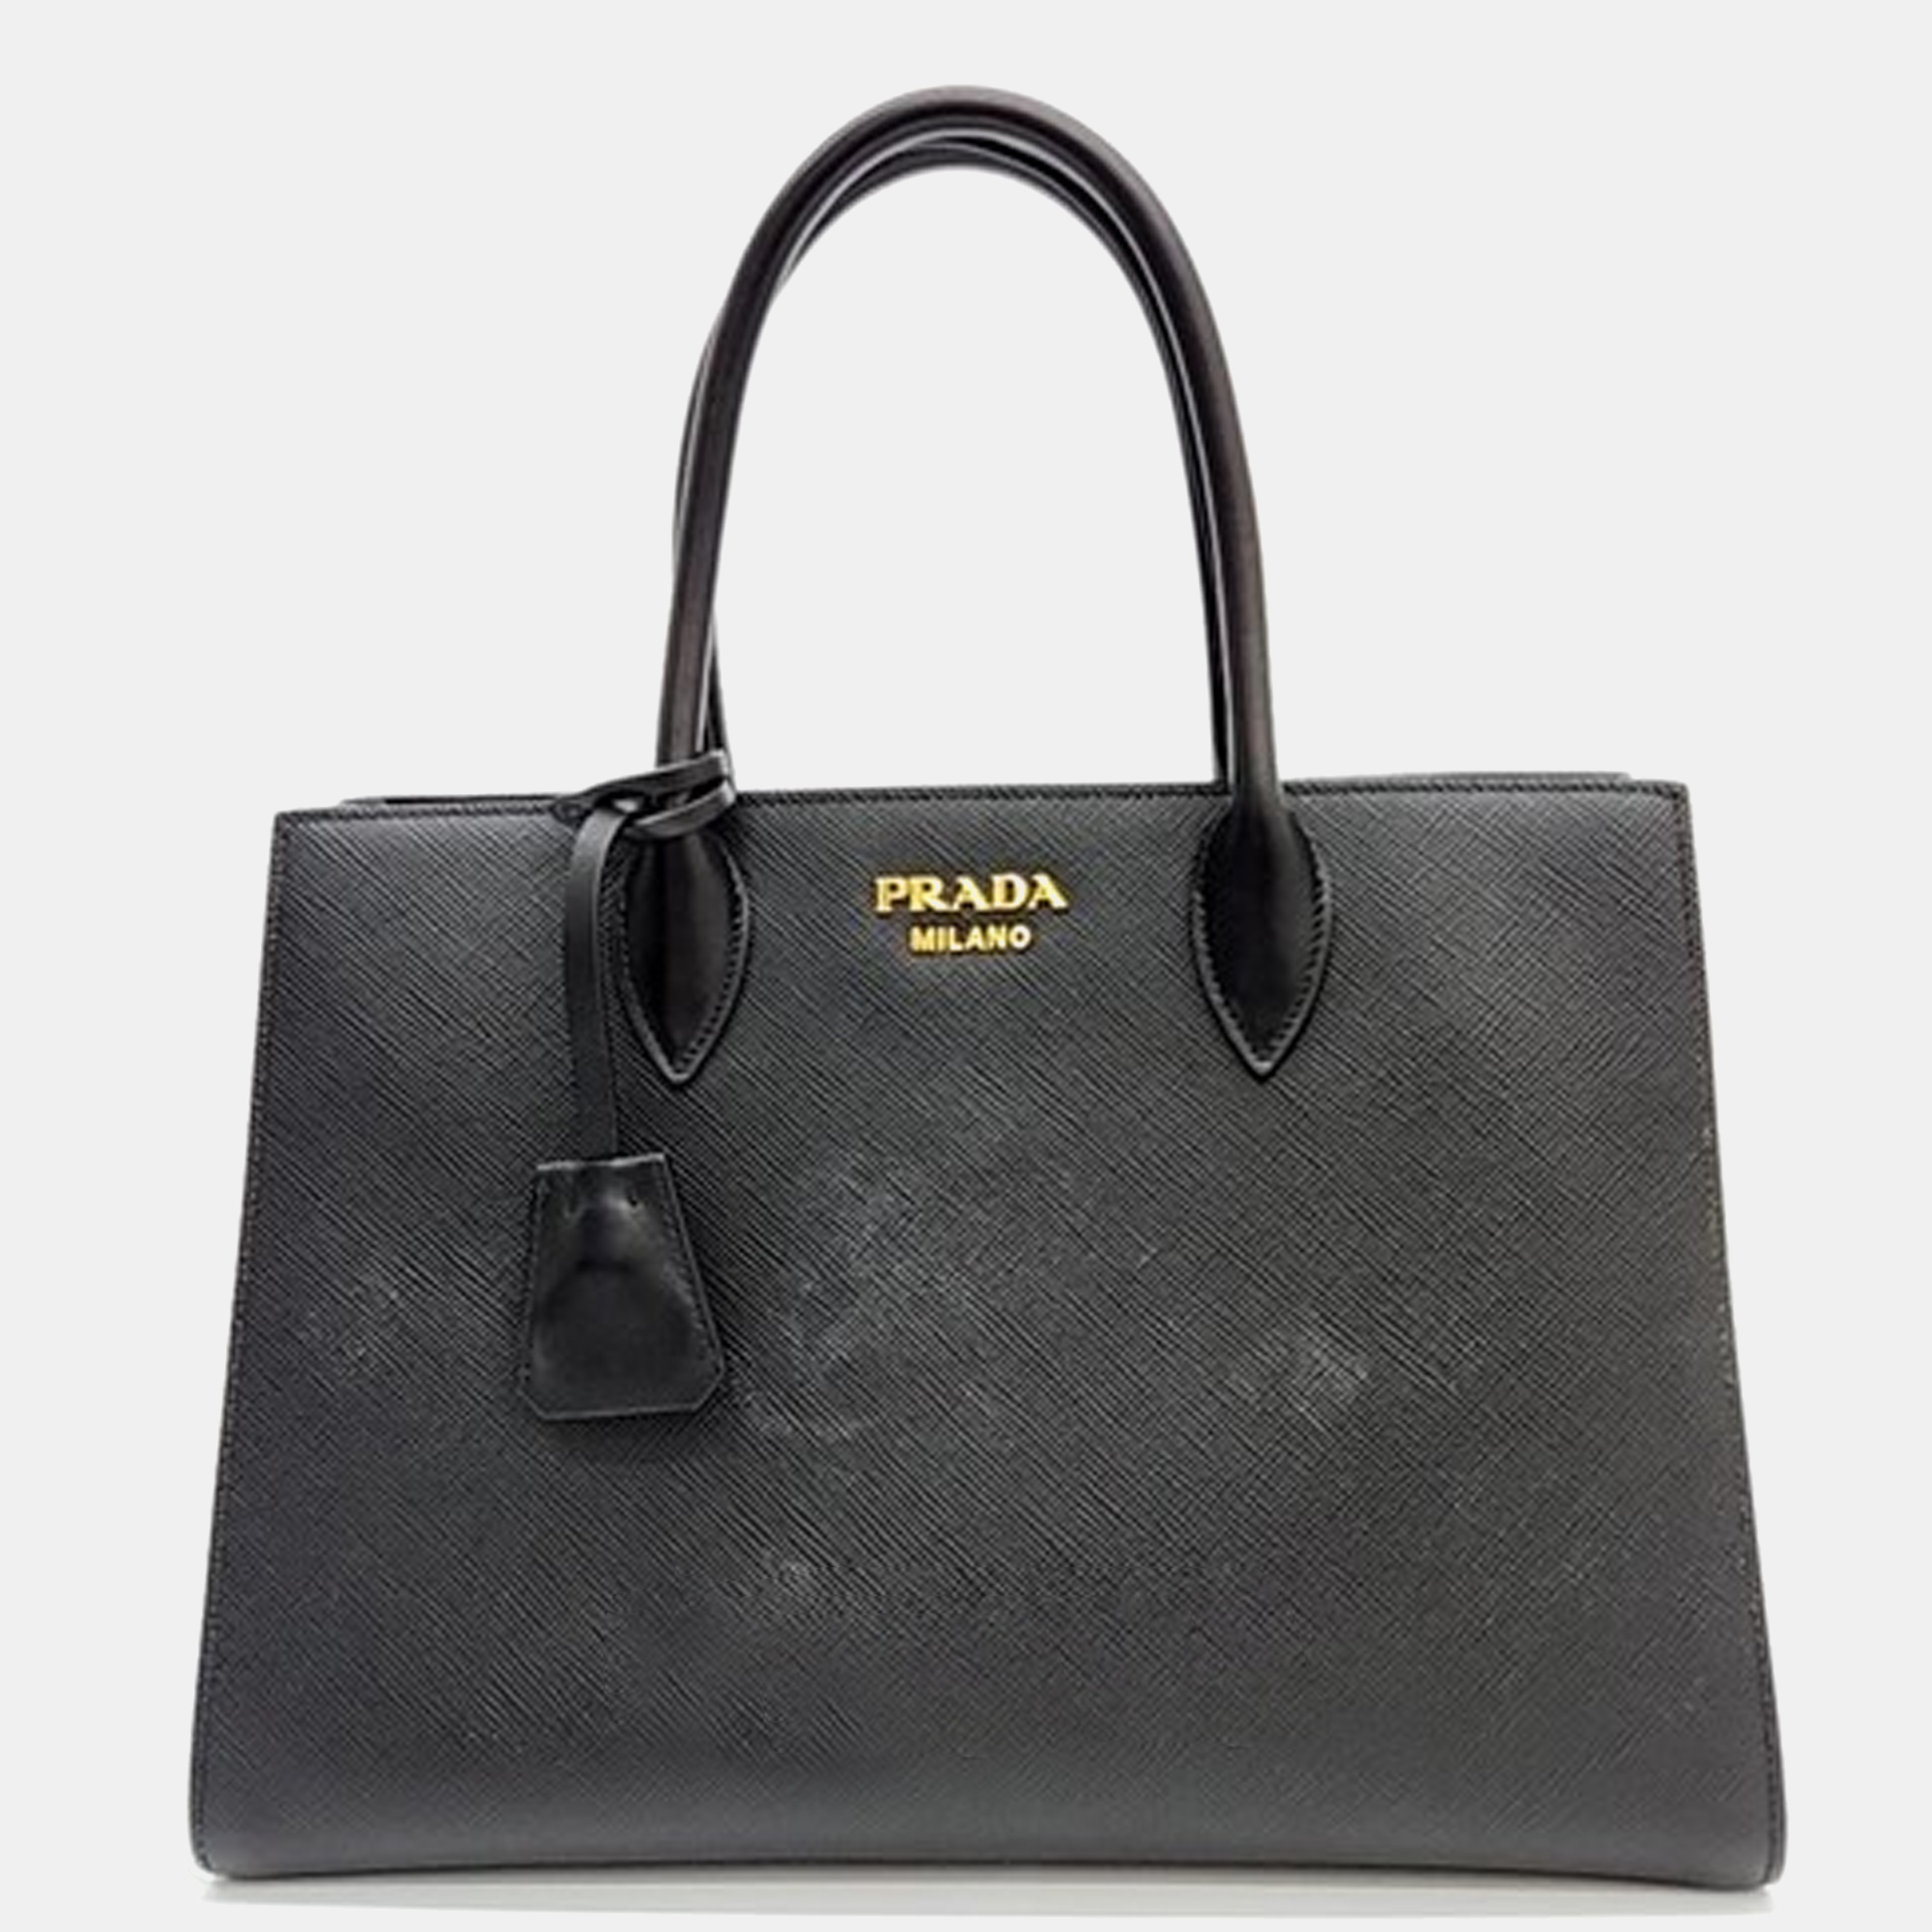 Handbags are more than just instruments to carry ones essentials. They essay ones sense of style and the better the bag the more confidence we get when we hold it. This designer bag is meticulously made from luxe materials and has a spacious interior.